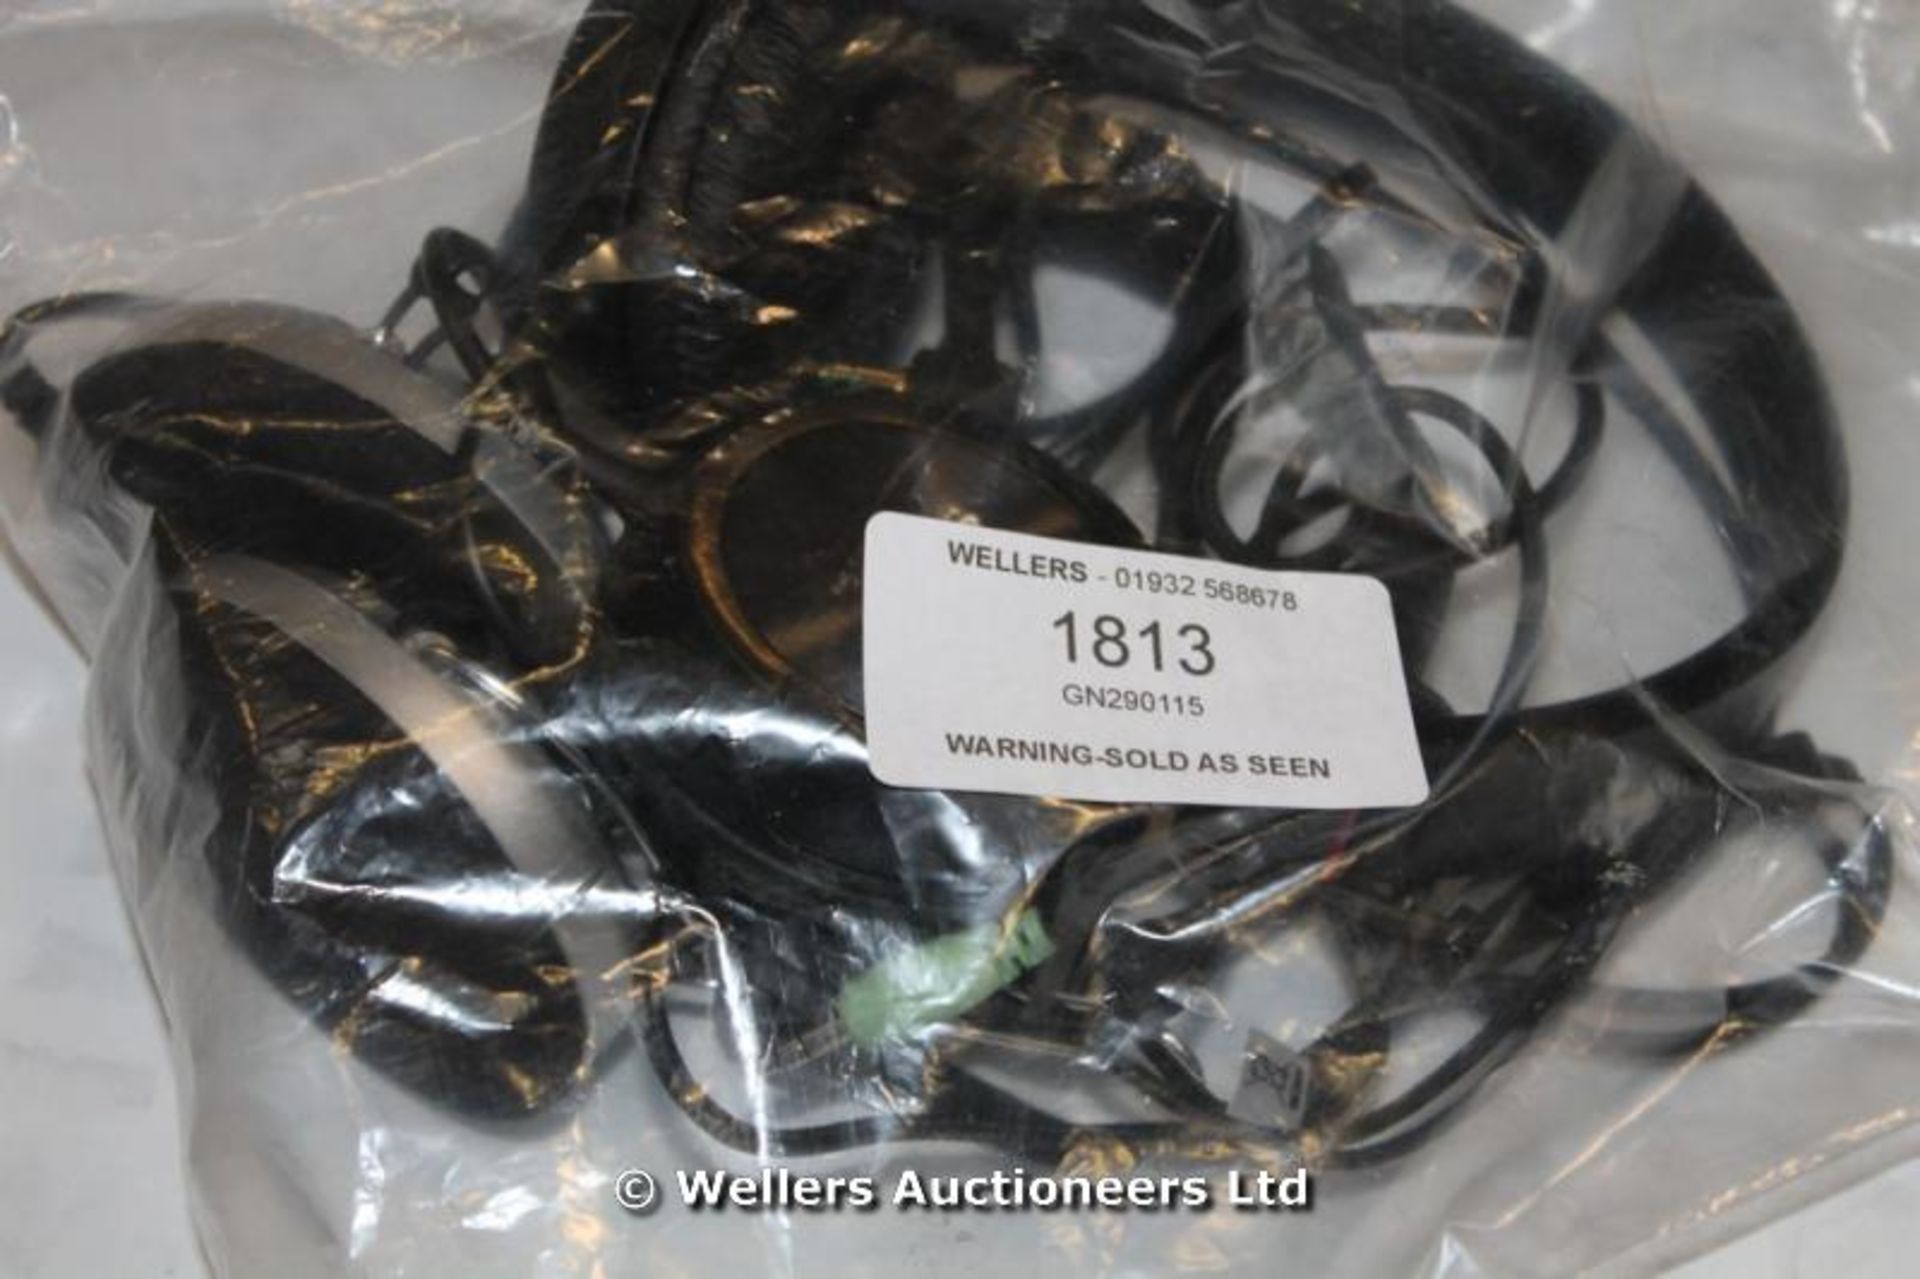 *BAG OF MIXED HEADPHONES INCLUDING / GRADE: UNCLAIMED PROPERTY (DC3)[GN290115-1813}